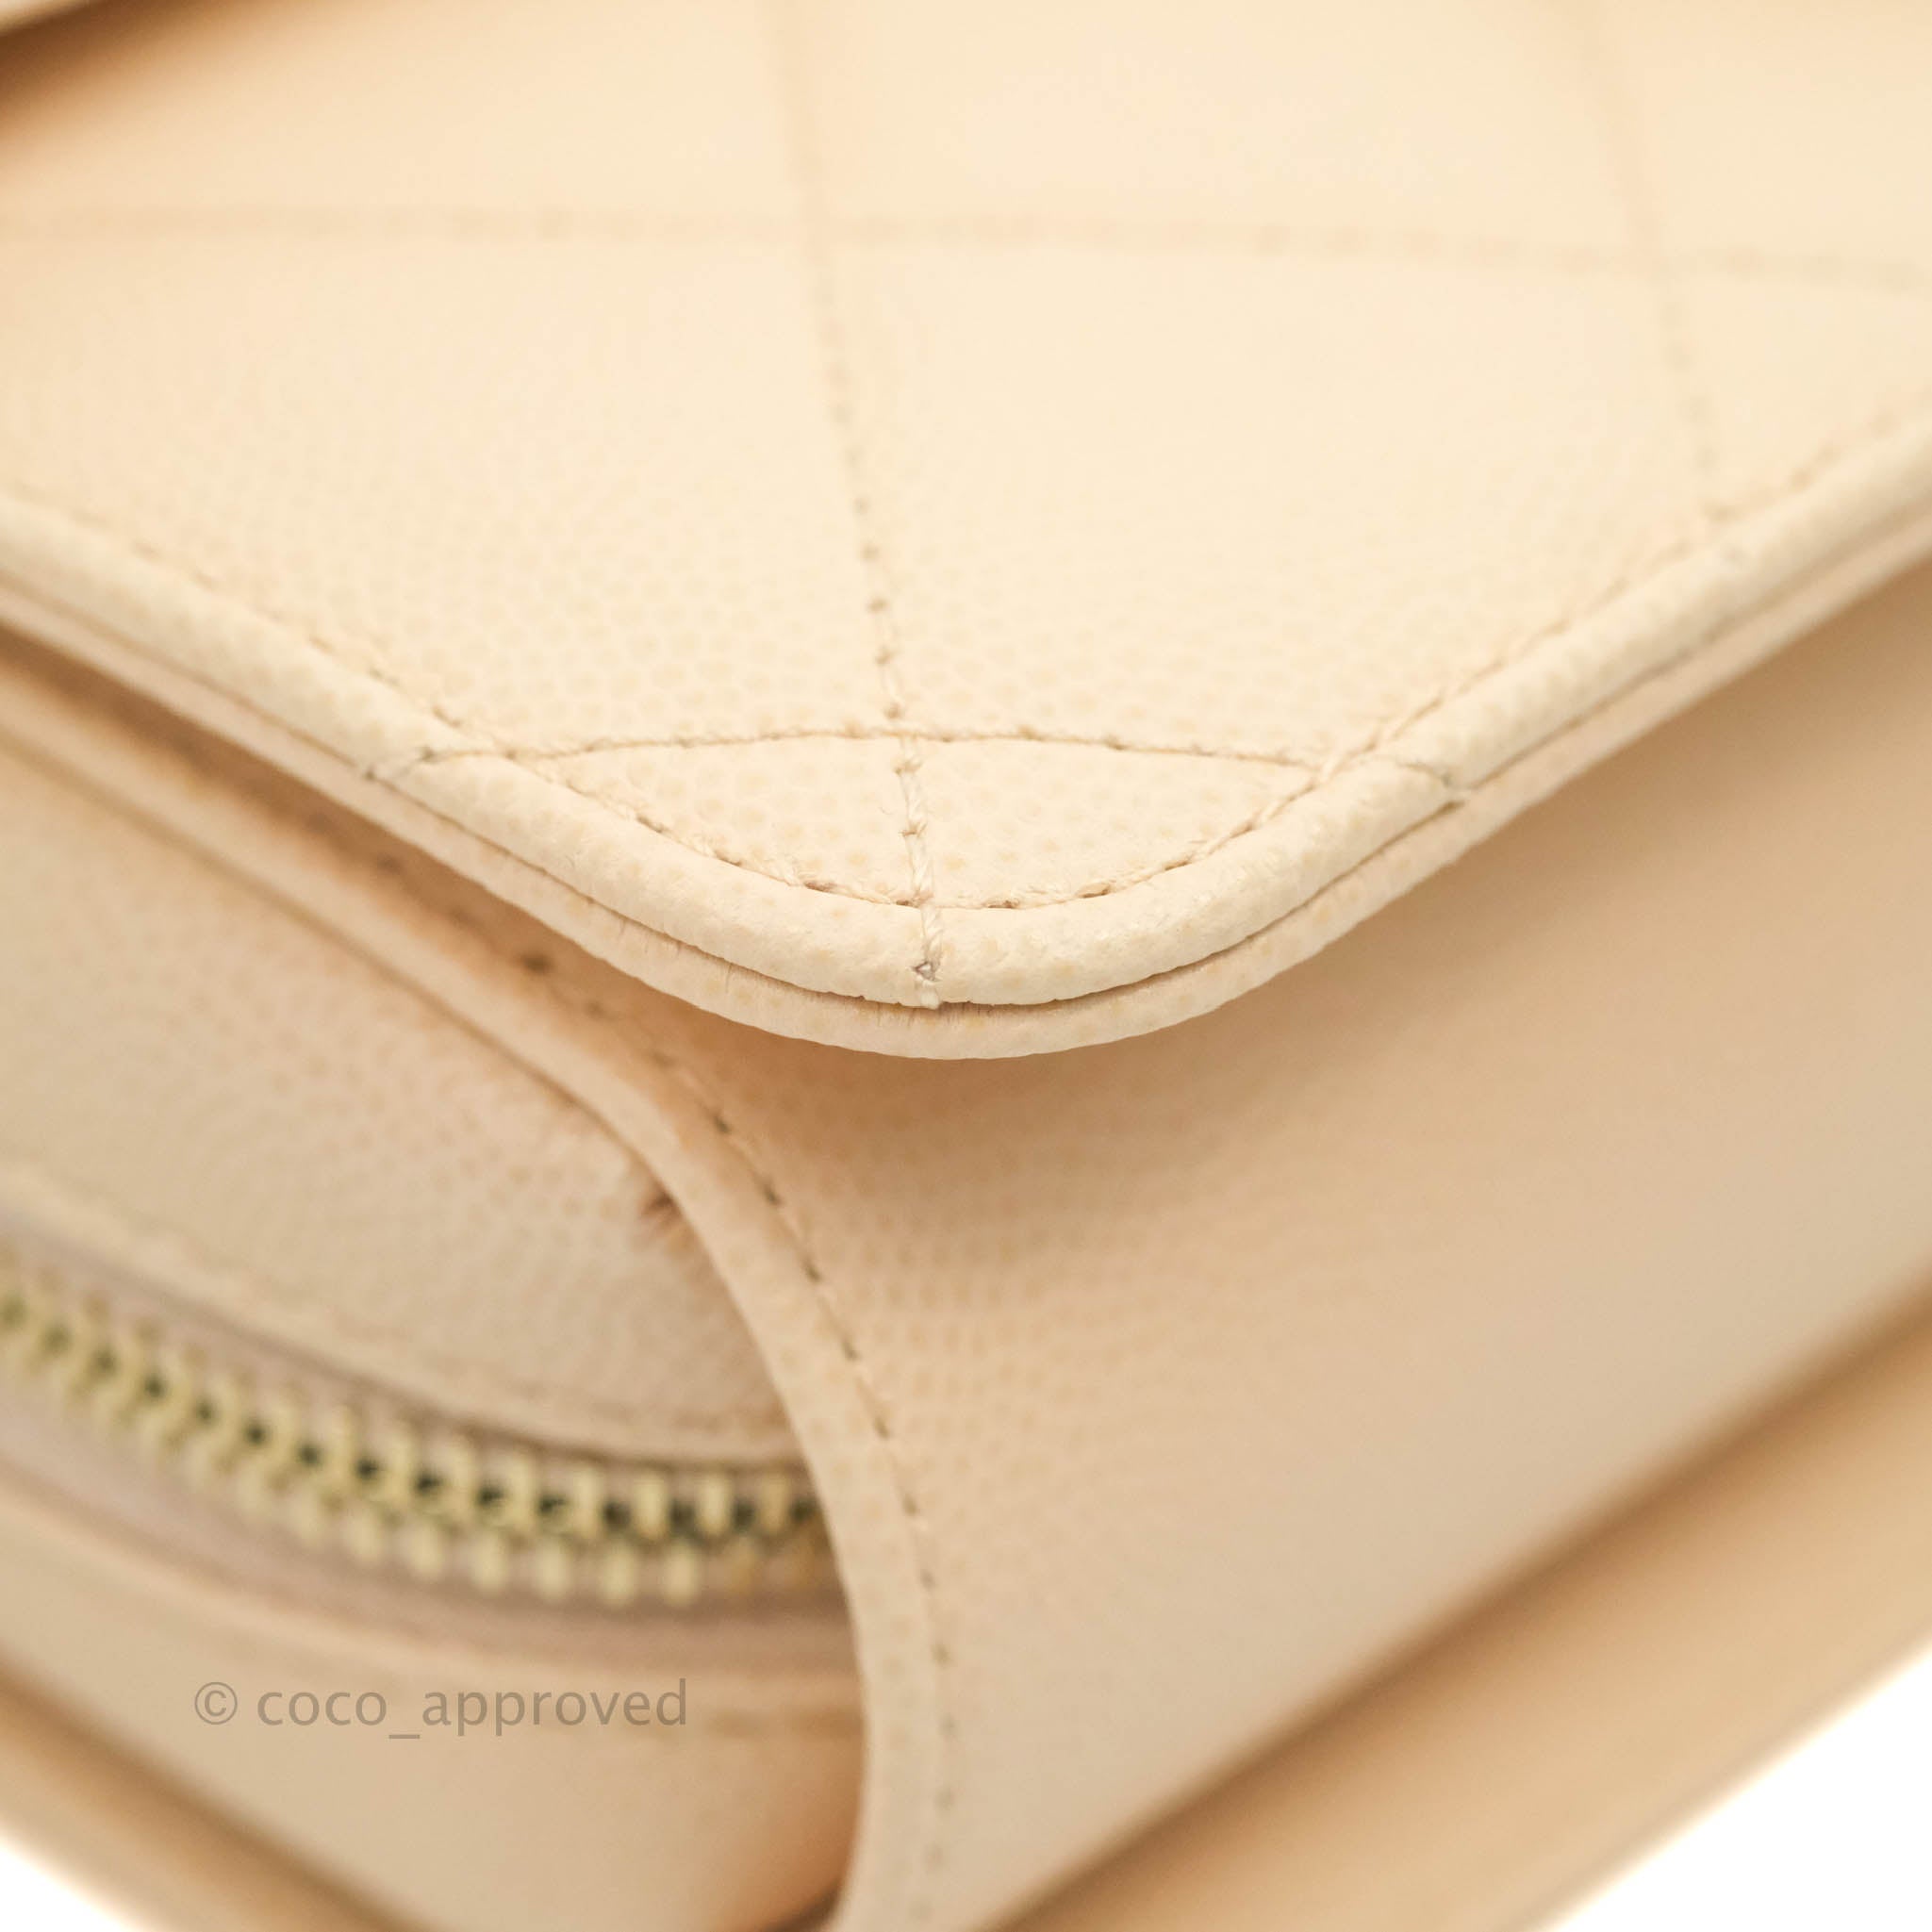 Chanel Quilted Small Like The Wallet Flap Light Beige Caviar Light Gol –  Coco Approved Studio